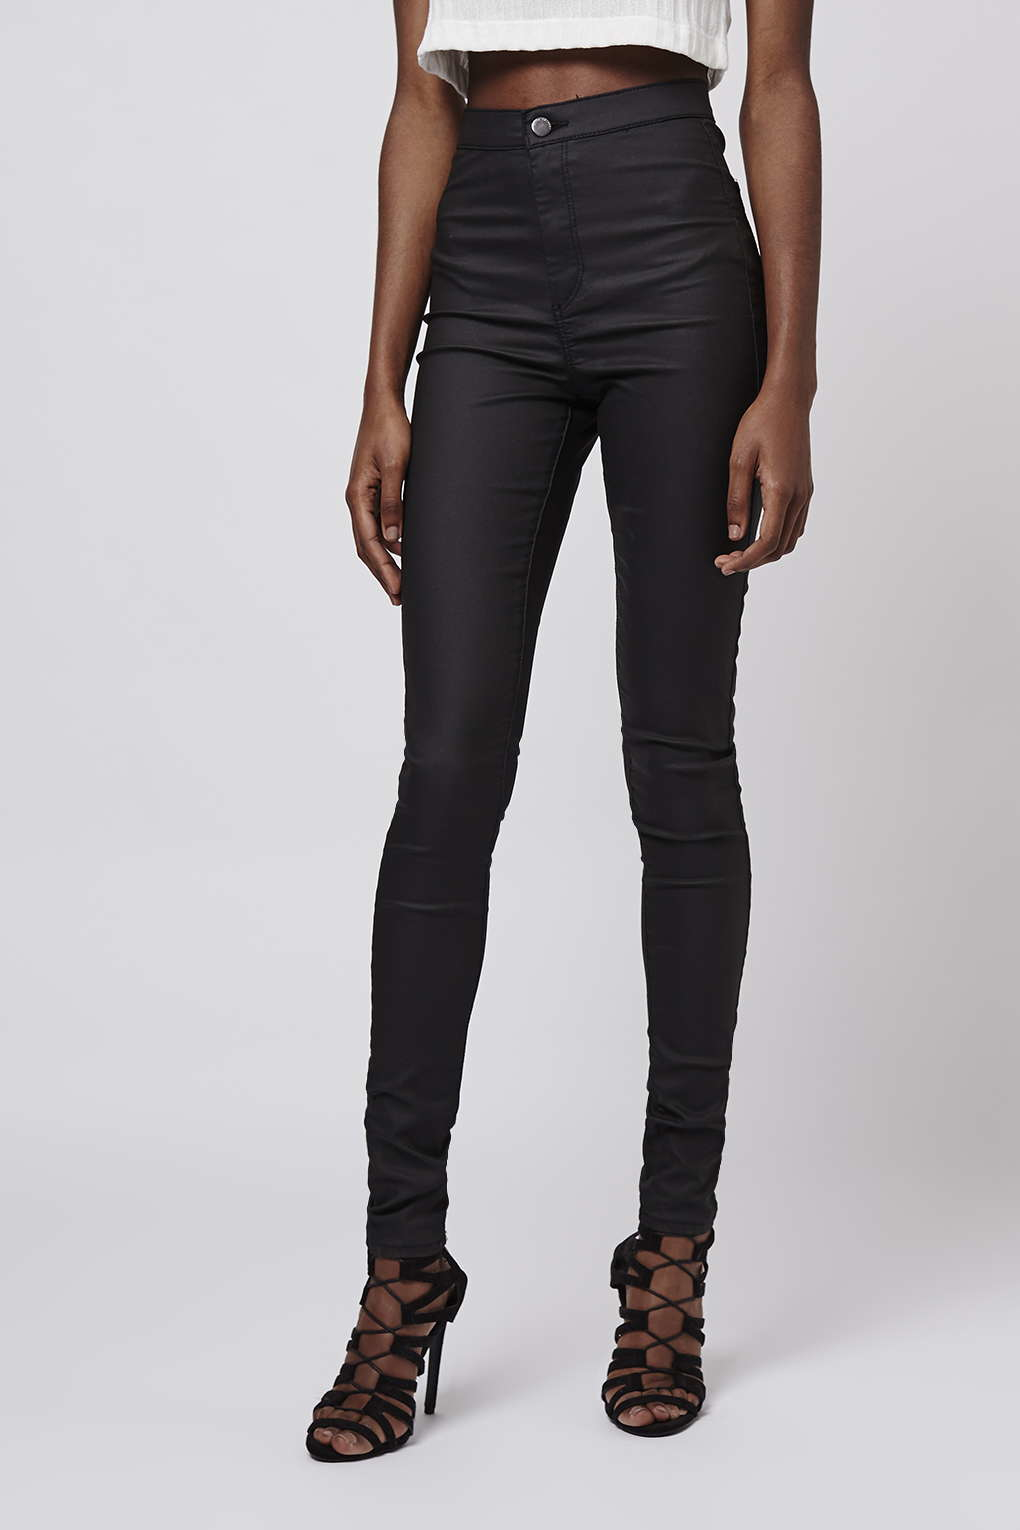 Topshop Leather Joni Jeans Online Sale, UP TO 65% OFF